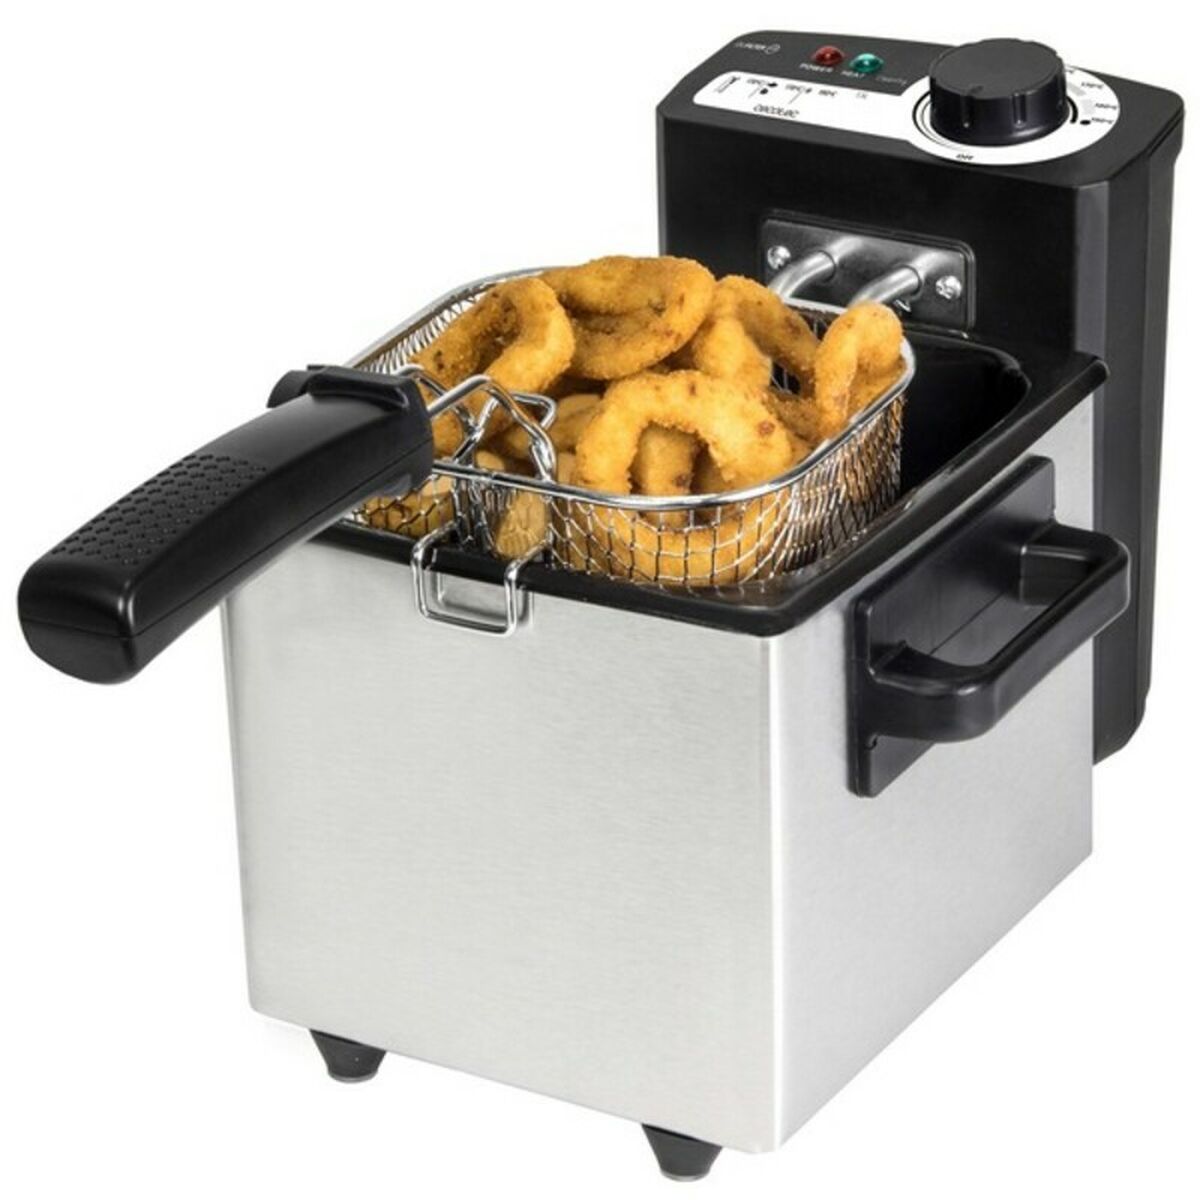 Fritteuse Cecotec Cleanfry 1,5 L 1000W Rostfreier stahl - AWK Flagship